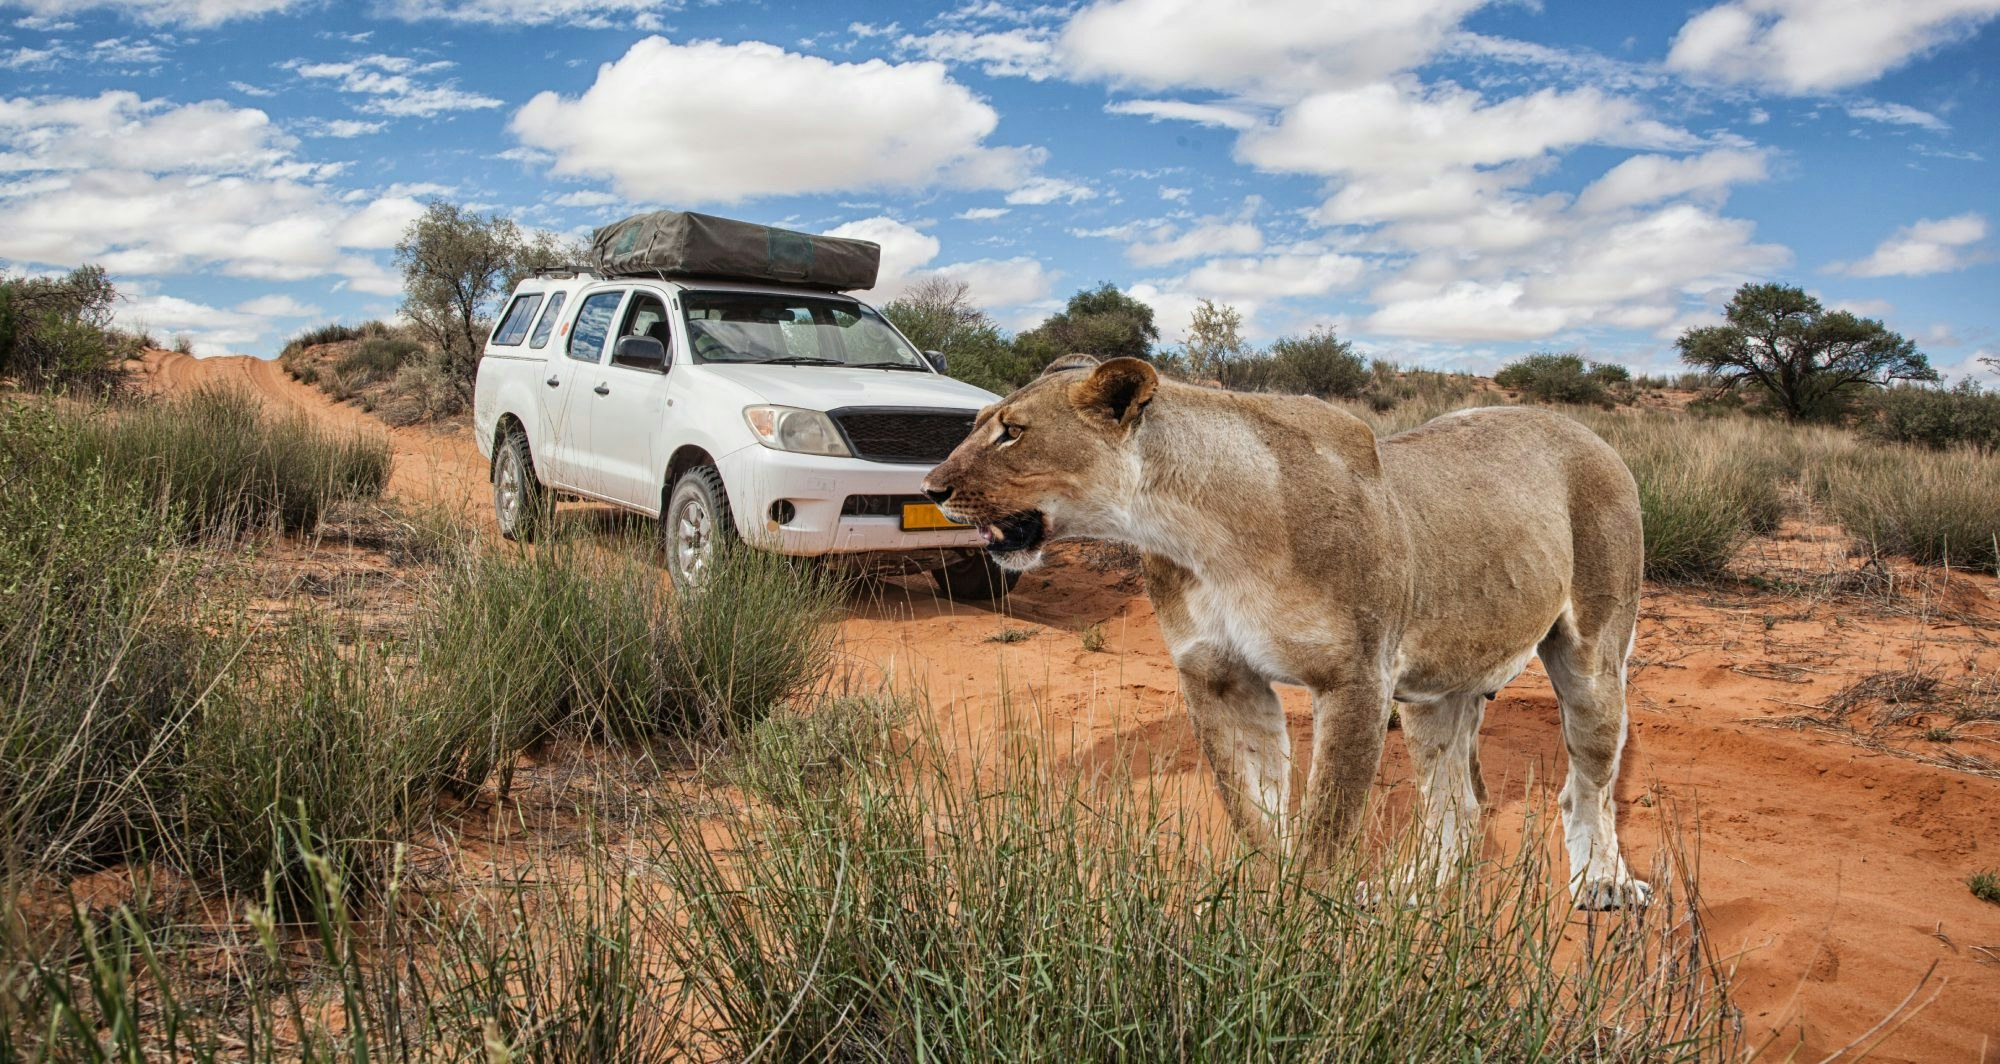 A lioness passes in front of a safari truck on a dirt path in a game reserve